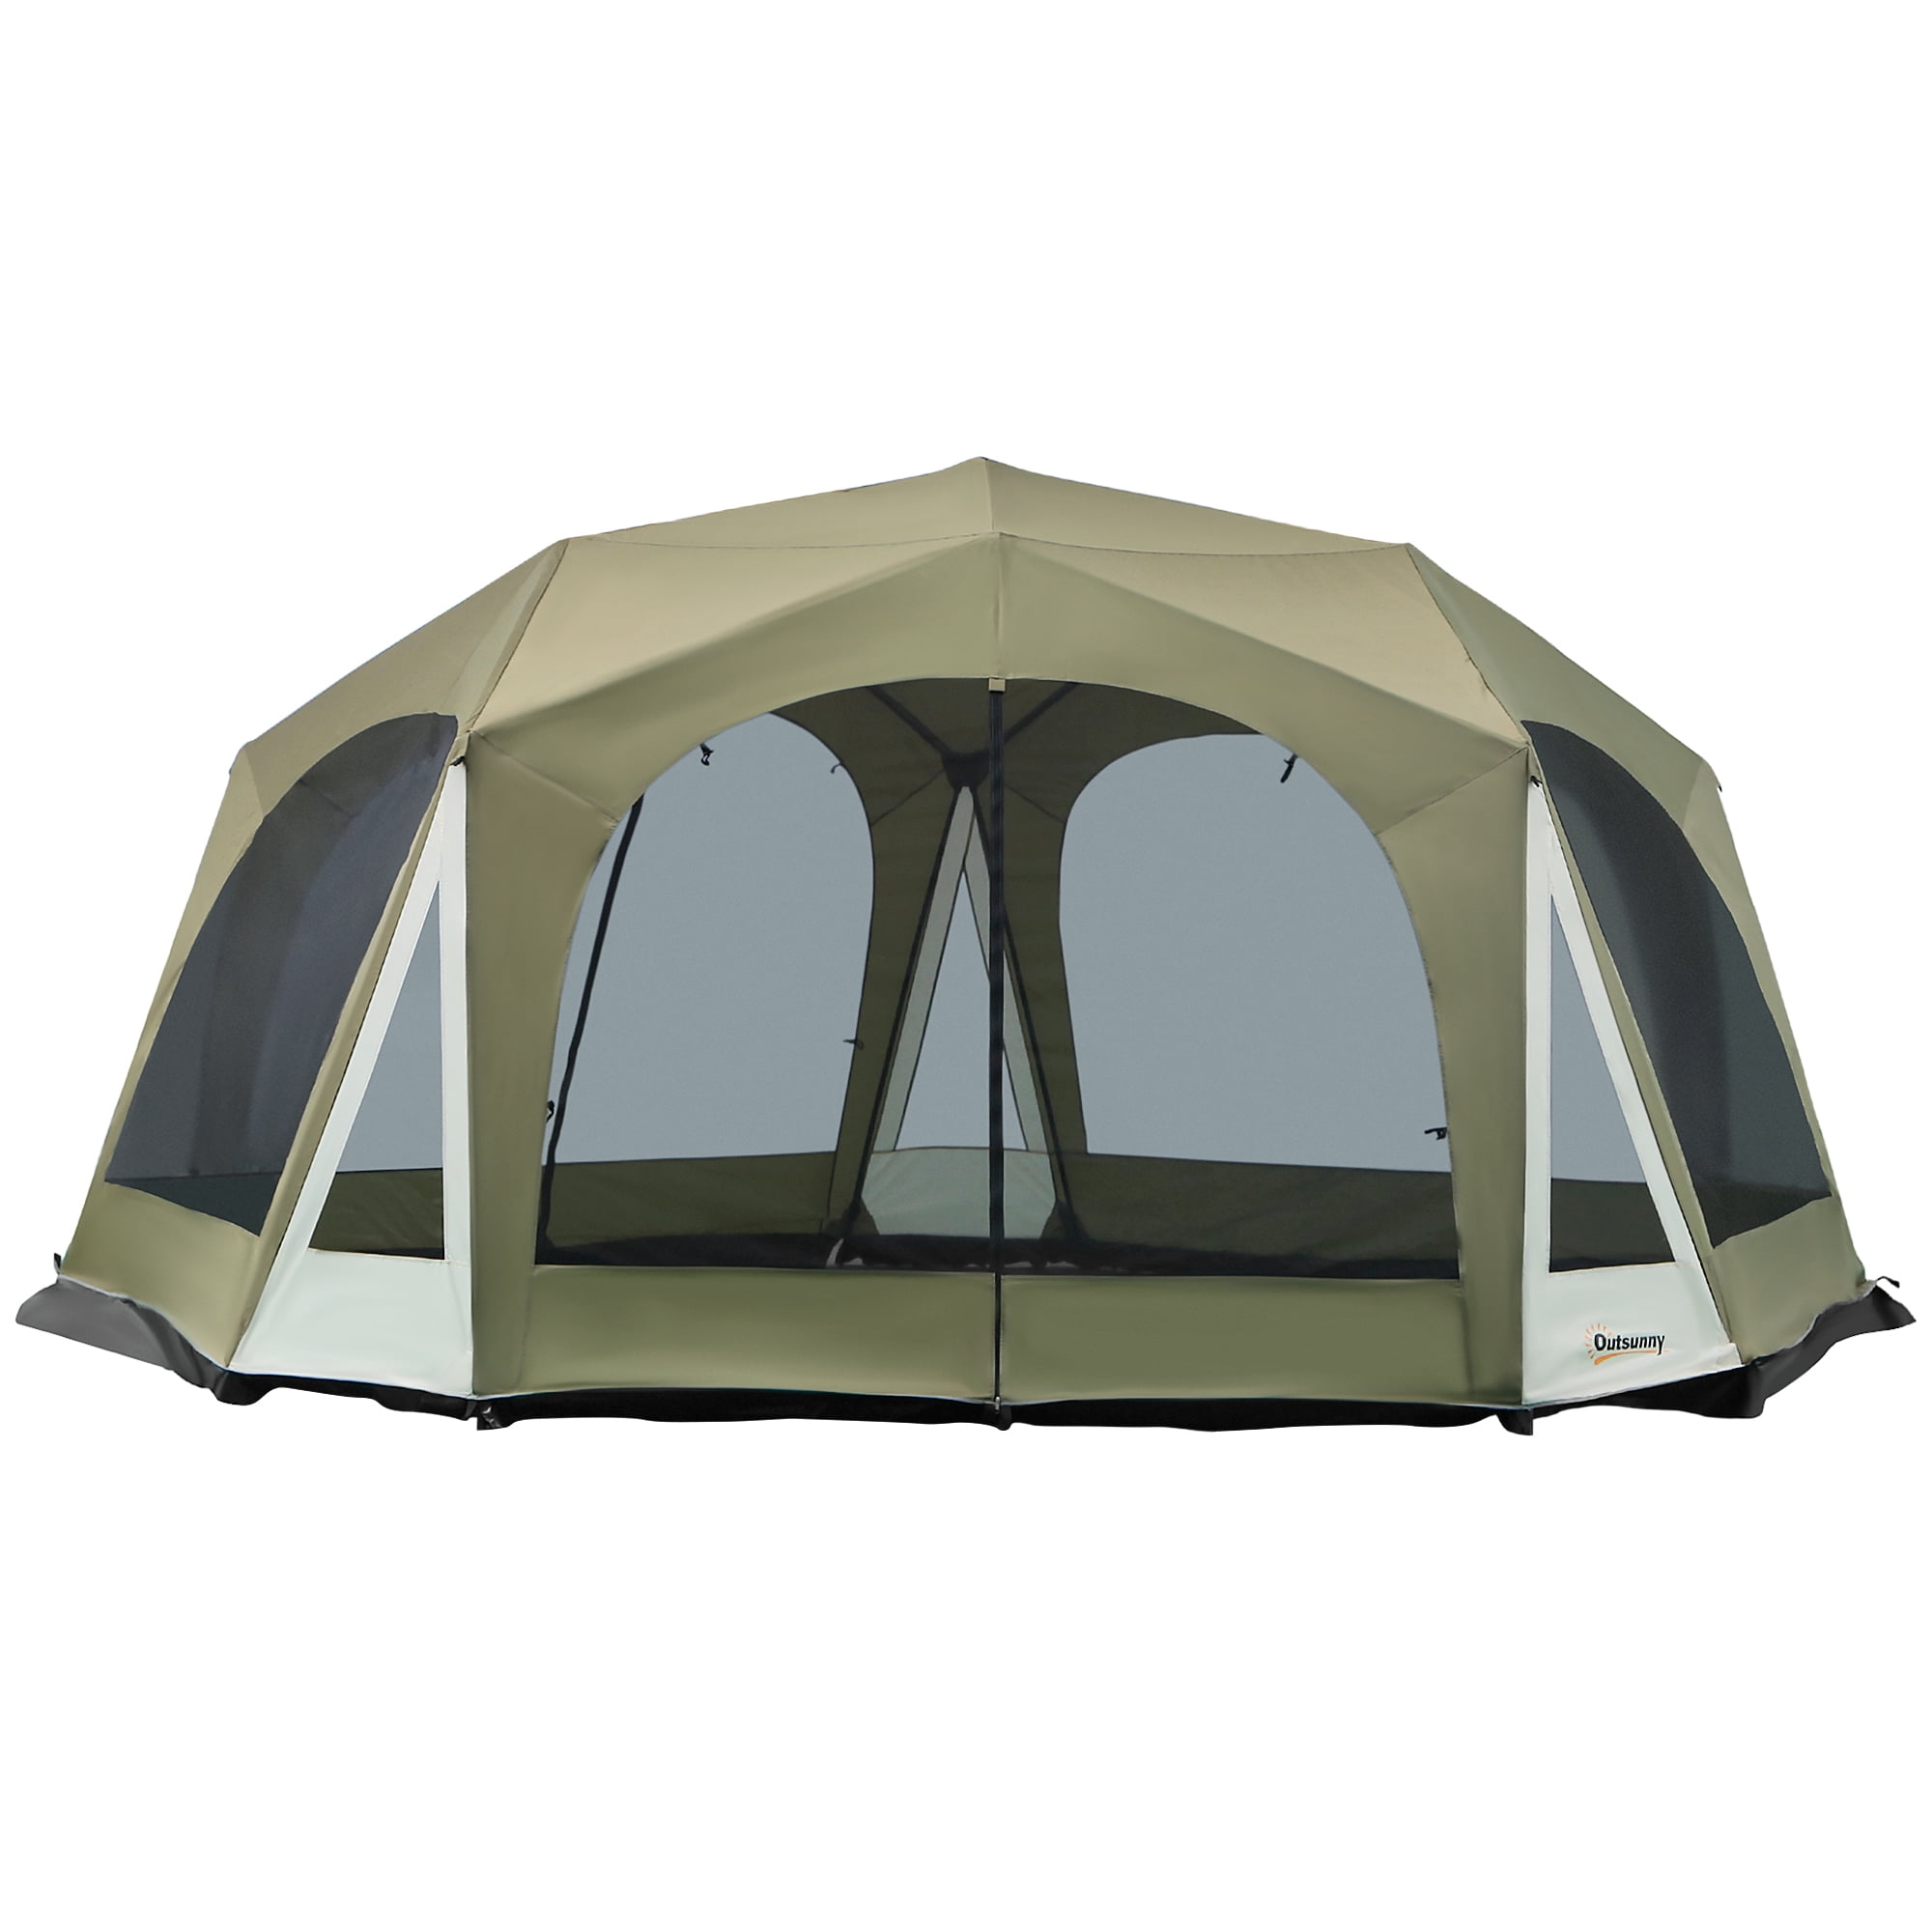 Outsunny 20 Person Camping Tent, Outdoor Cabin Tent Tent with 2